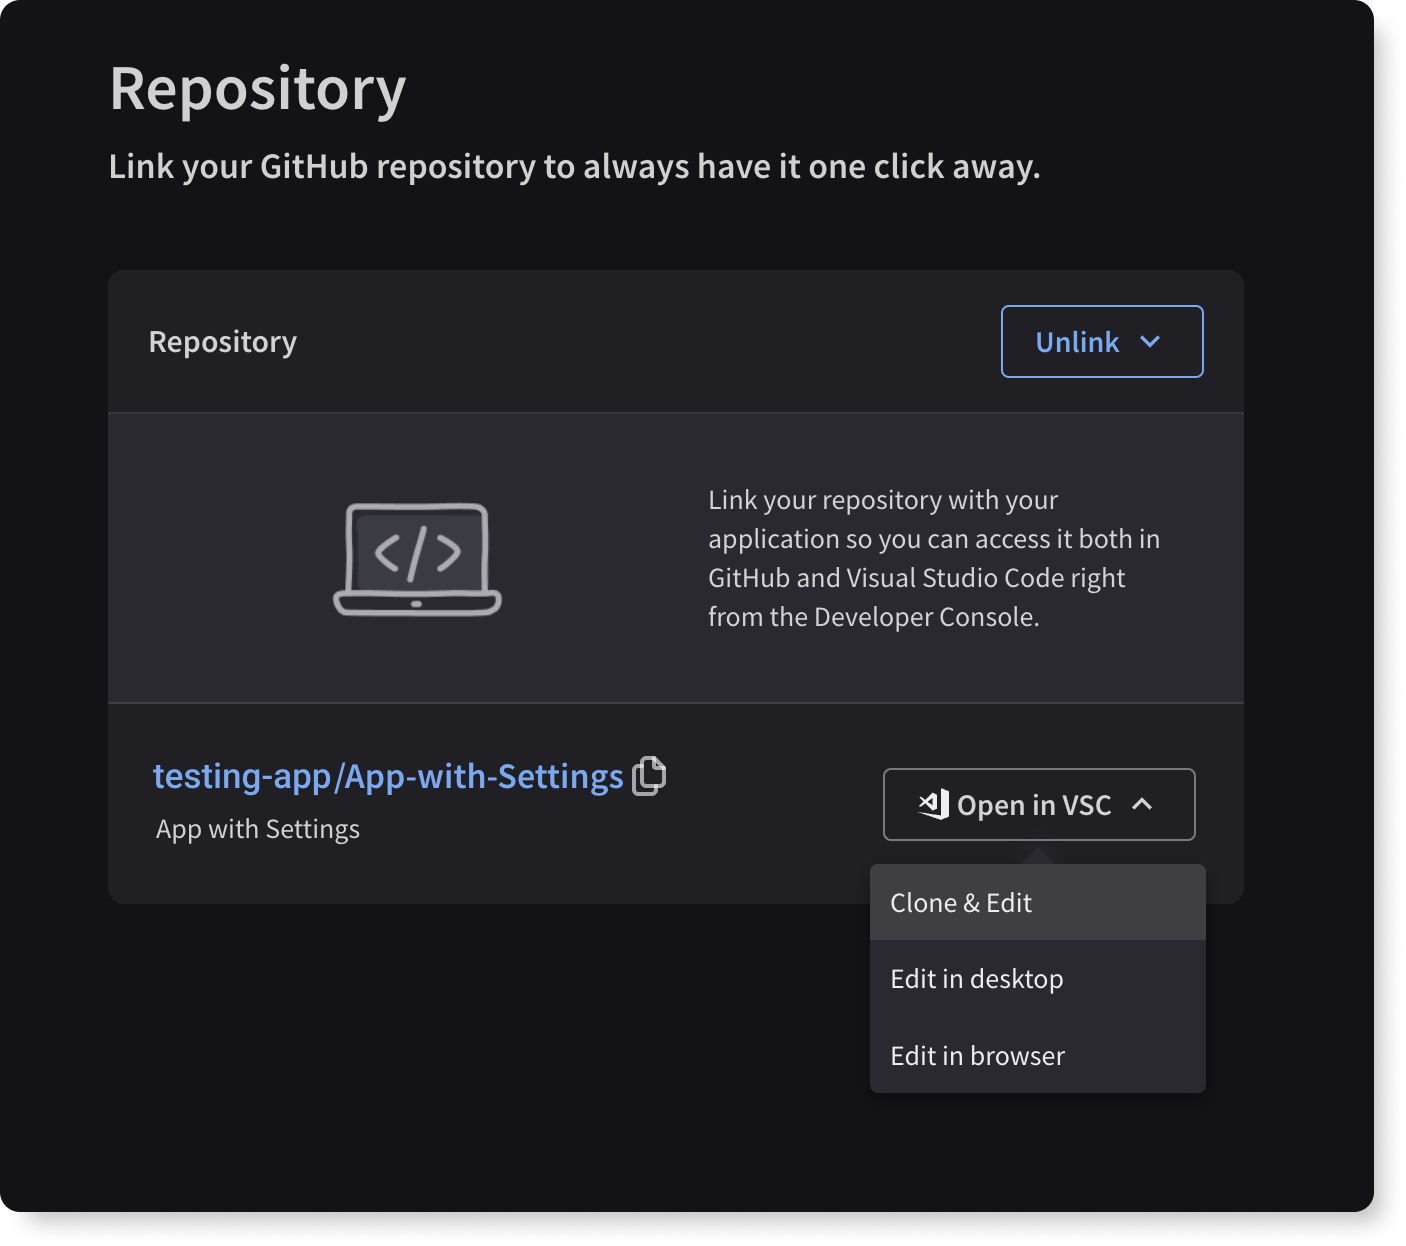 LiveChat GitHub repository linked